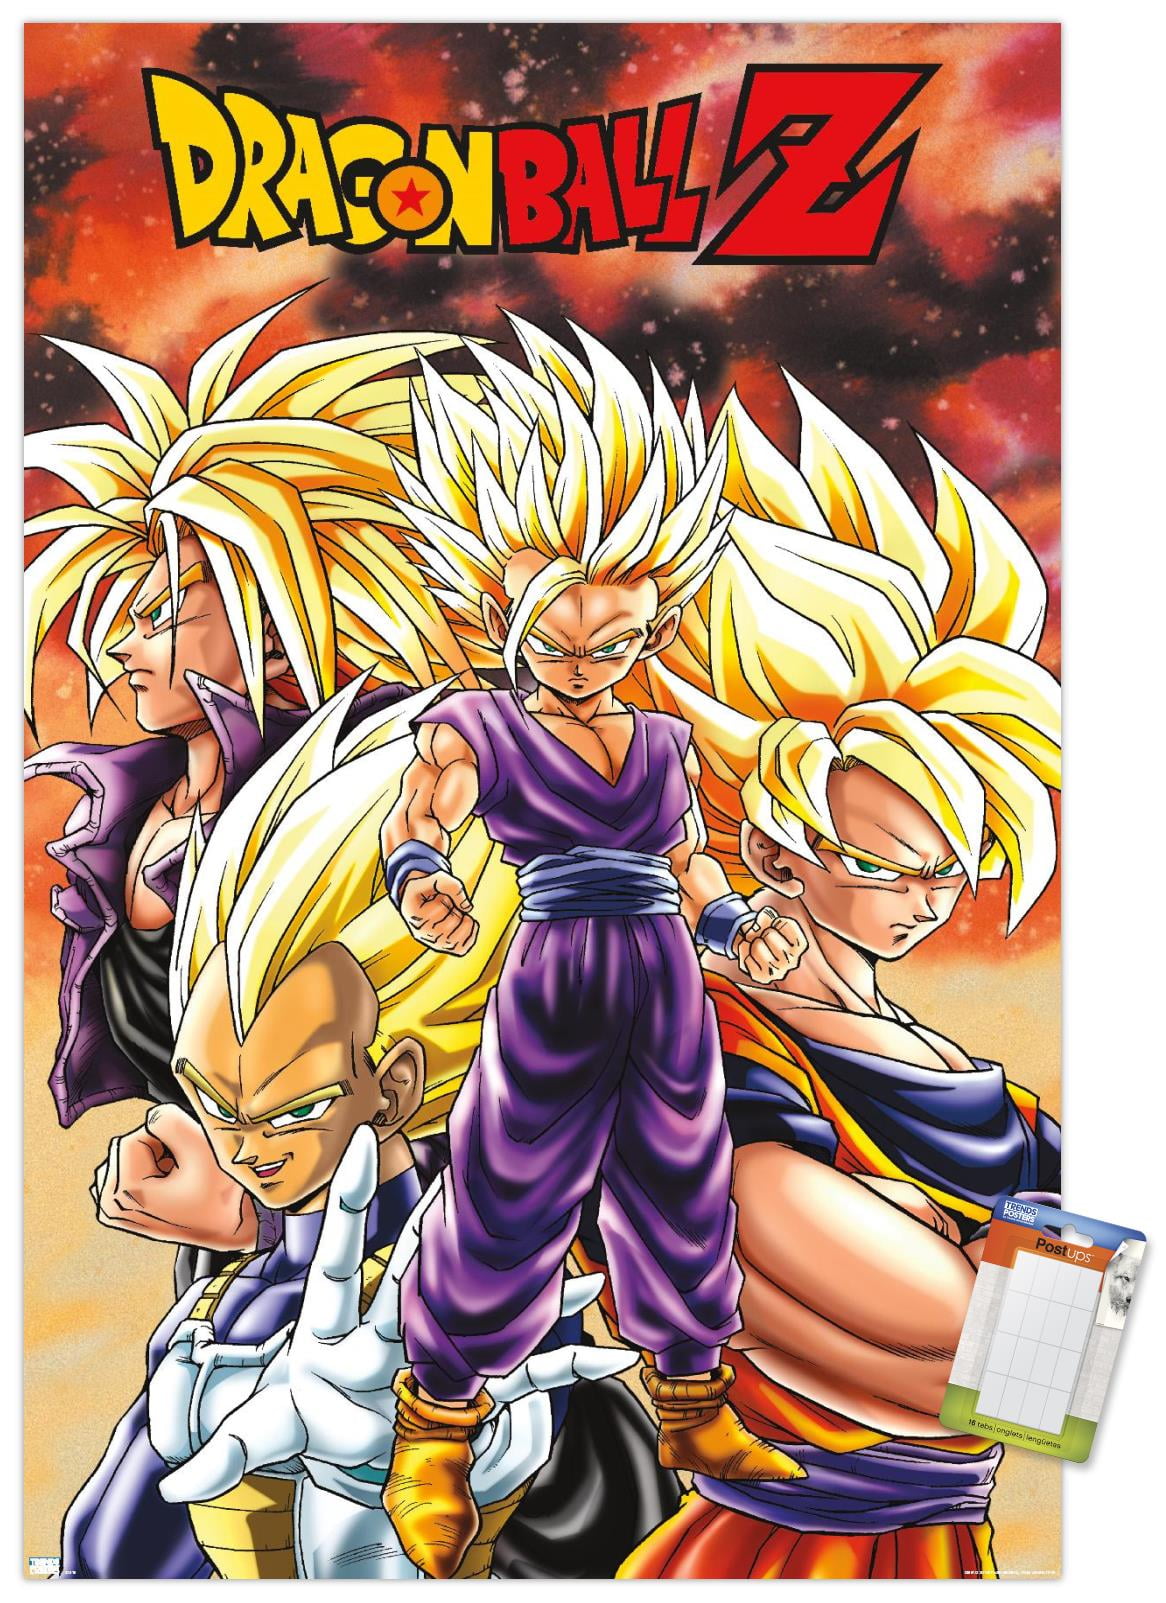 Thought i'd draw up a super saiyan Pan in the style of the new posters. : r/ dbz